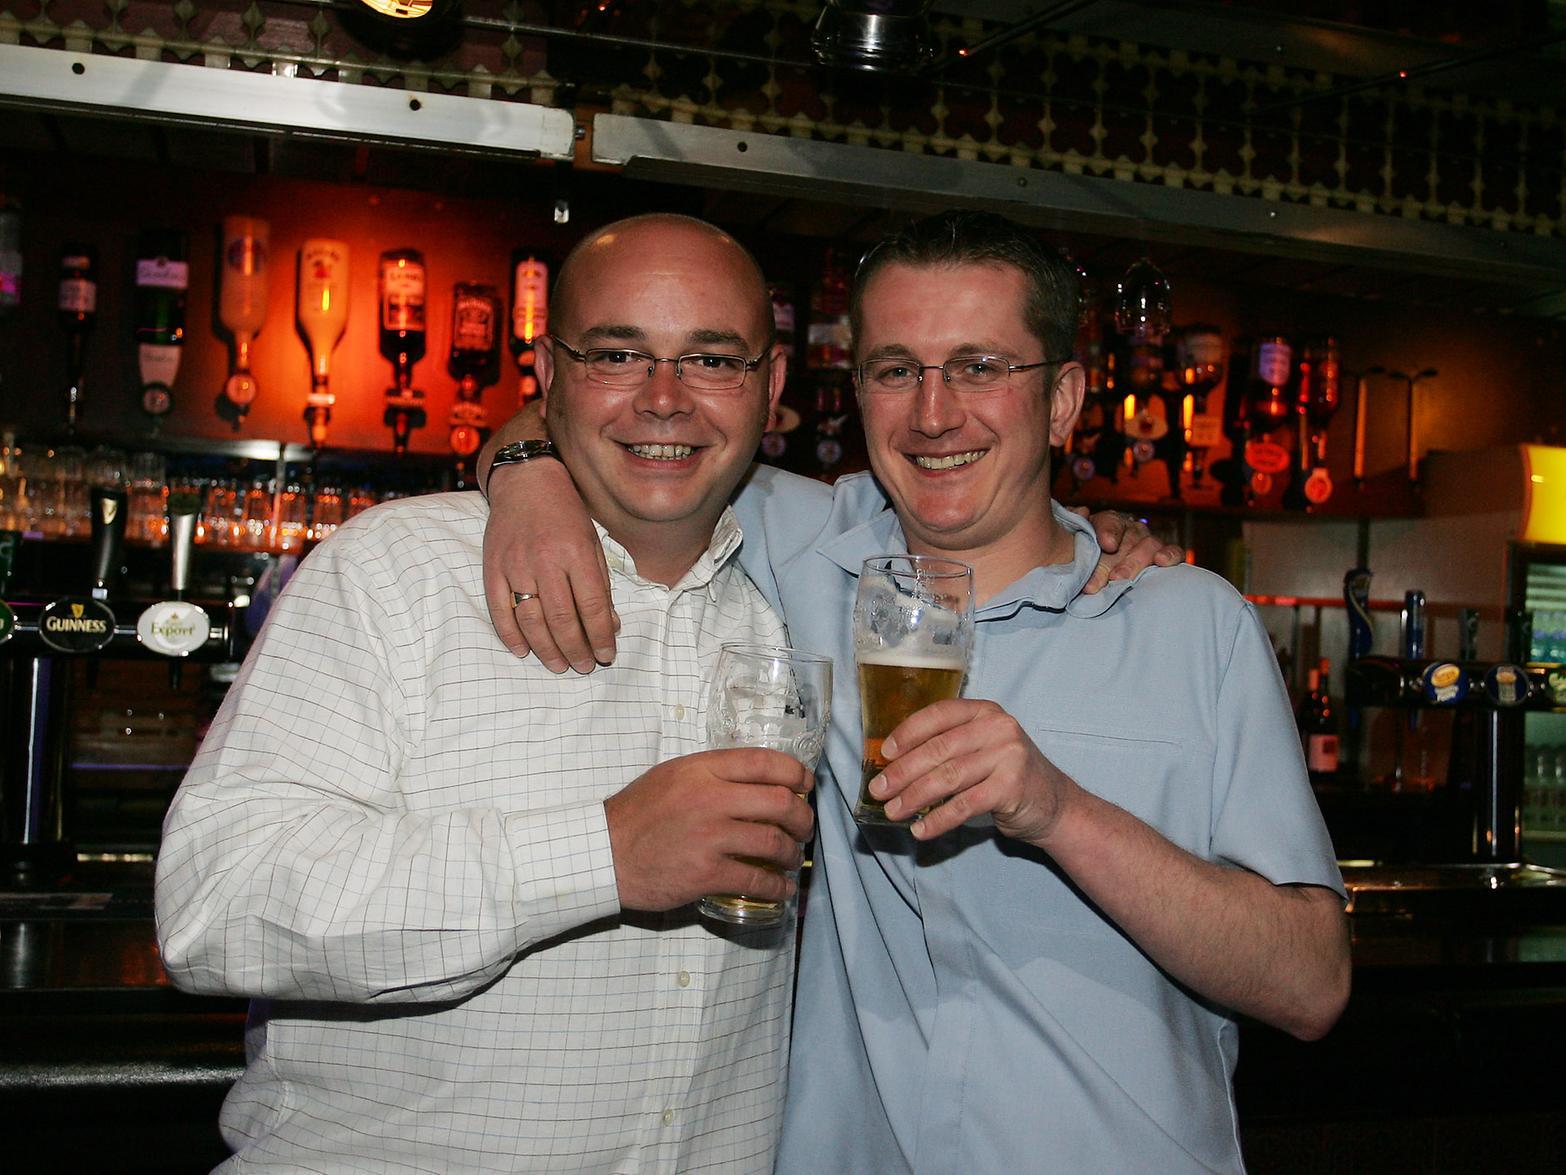 Groom-to-be Mike Cliffe (left) enjoys his last night of freedom with his best man Steve Fawcett at The Frontier.